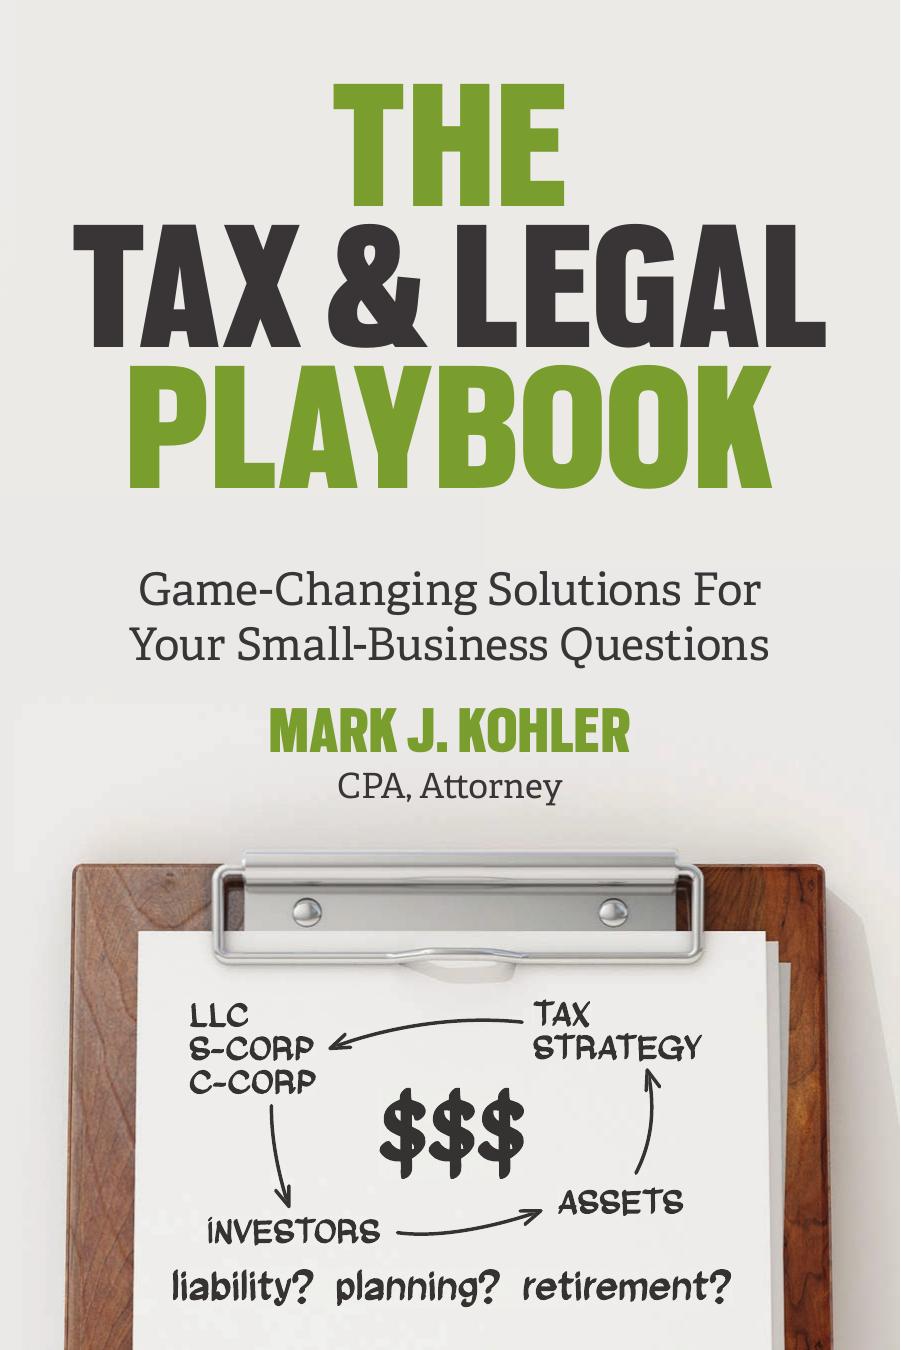 The Tax and Legal Playbook by Mark J. Kohler